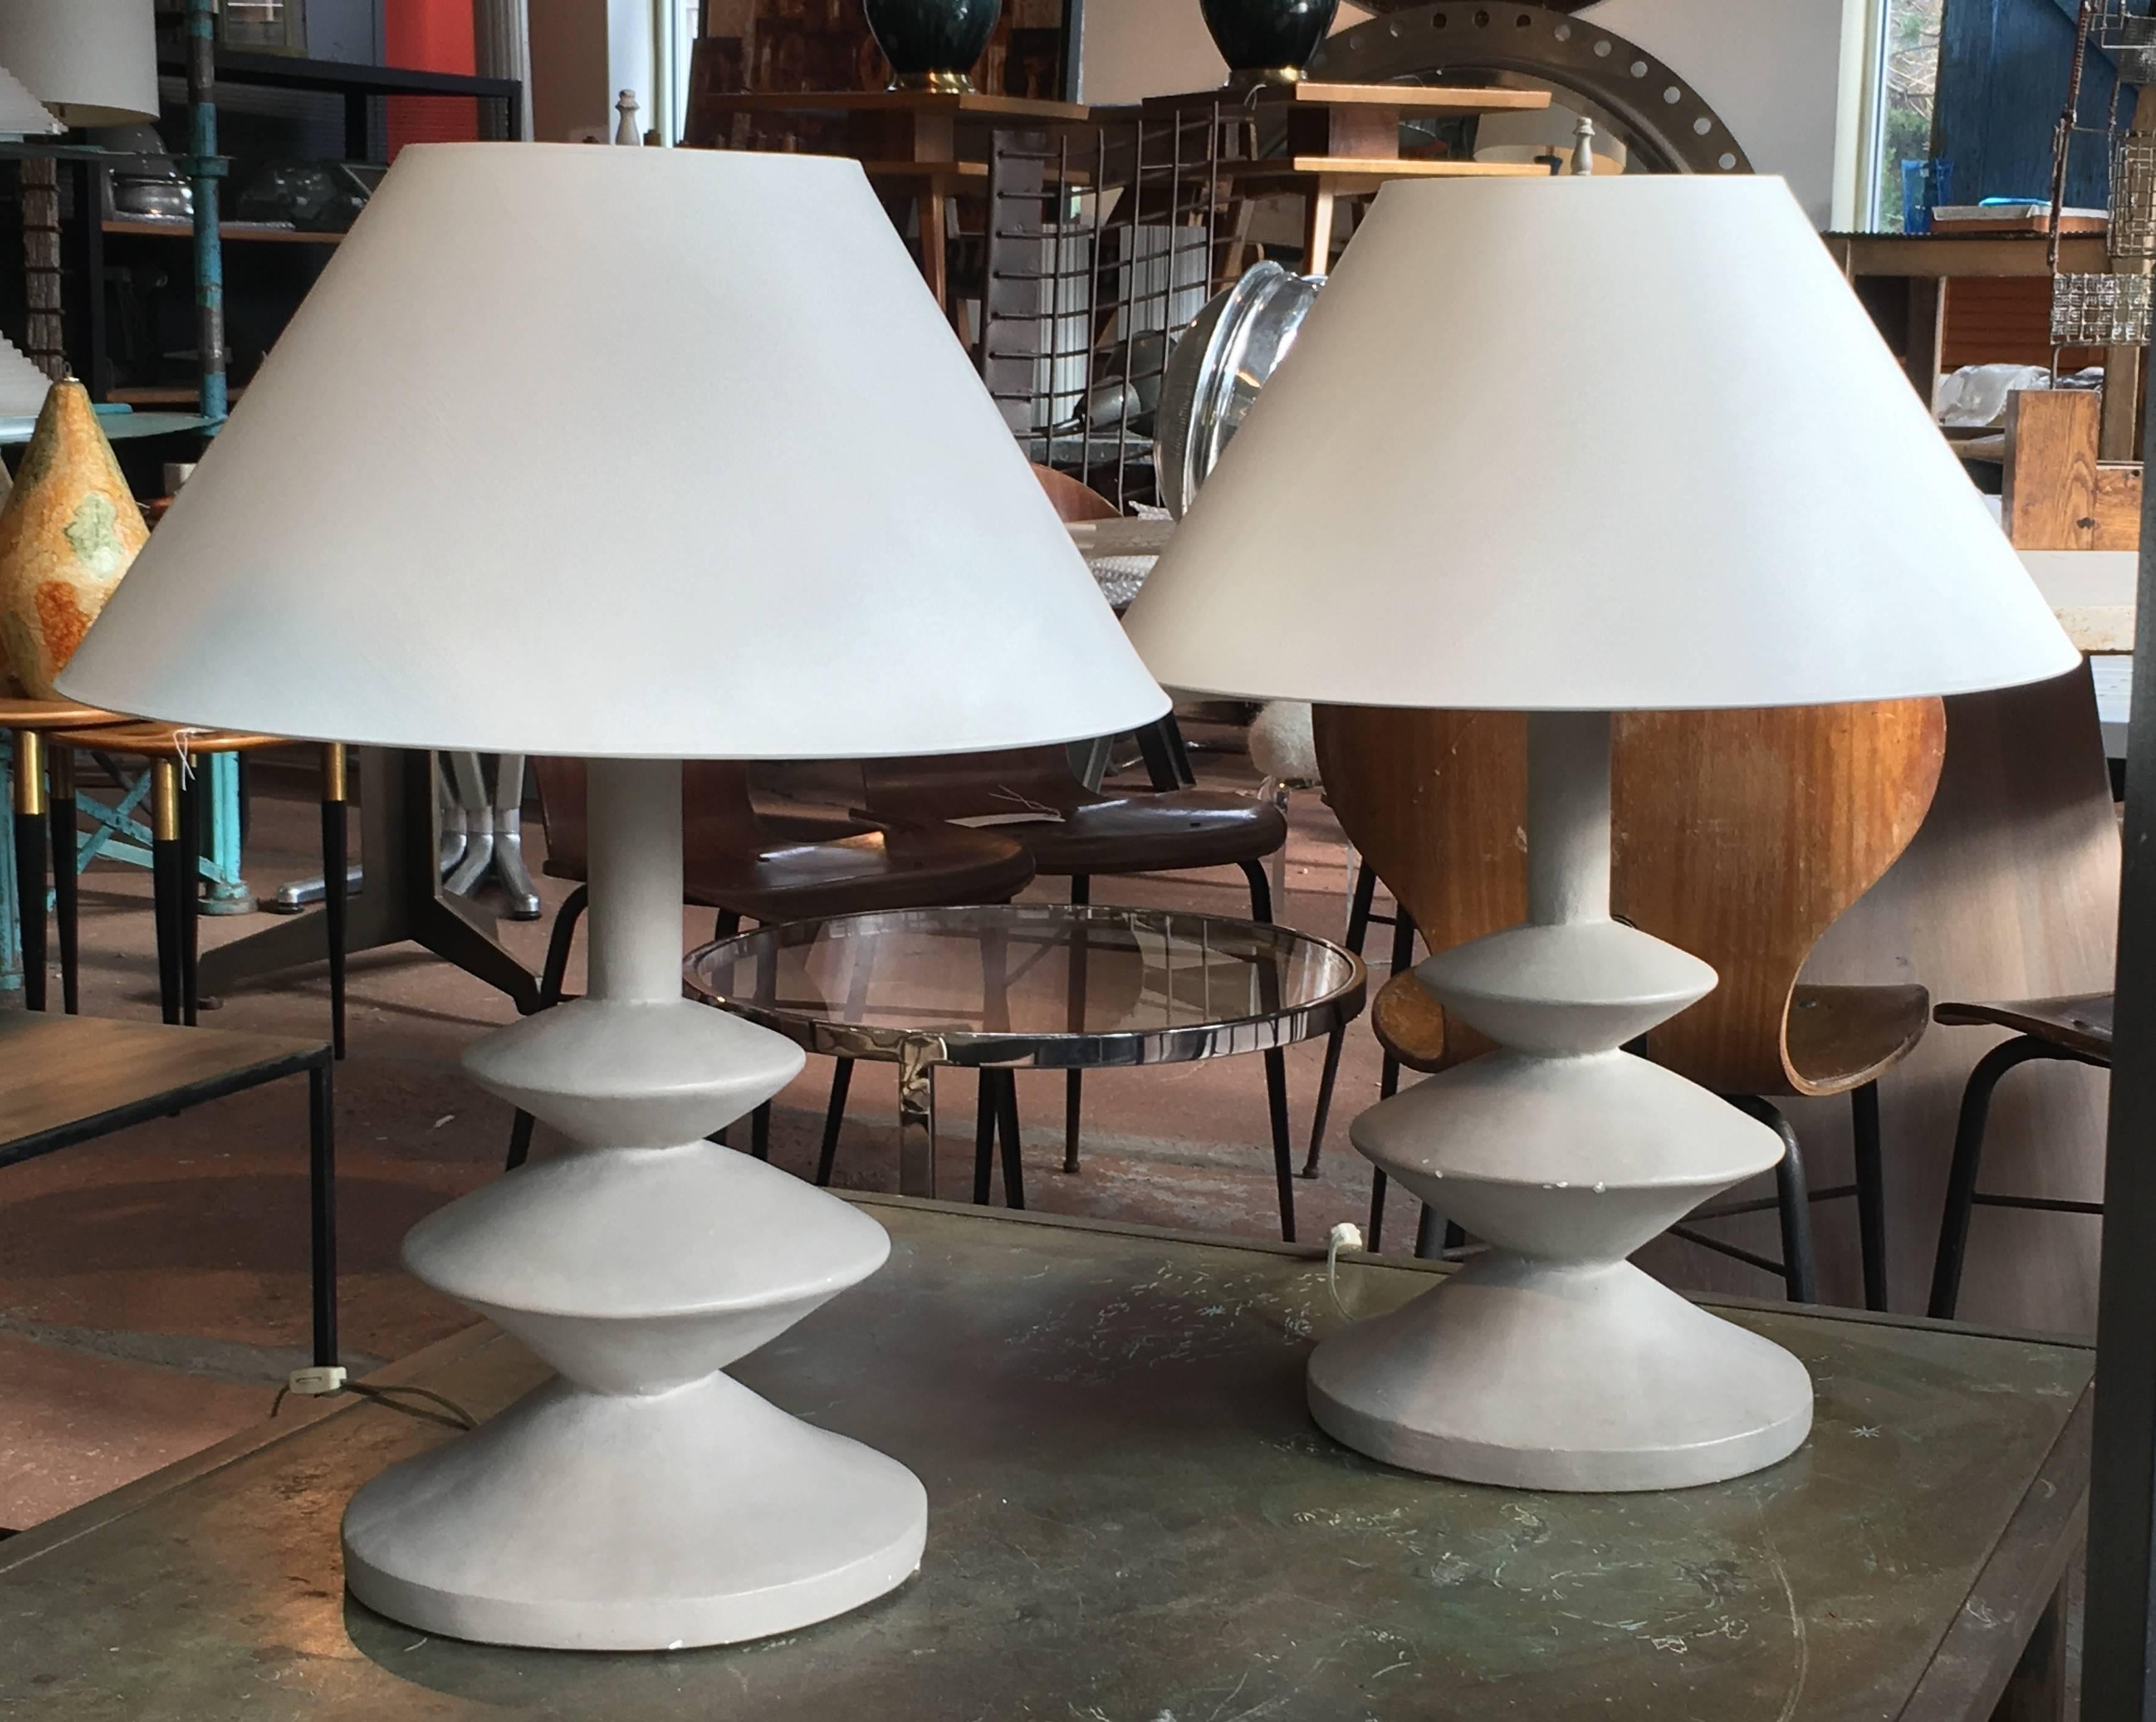 Original pair of plaster lamps by Jacques Granges for Yves Saint Laurent, inspired by Giacometti's 1930s model made for Jean Michel Frank. Rare gray putty color; original condition, a few surface nicks to finish. Original shades are included but new